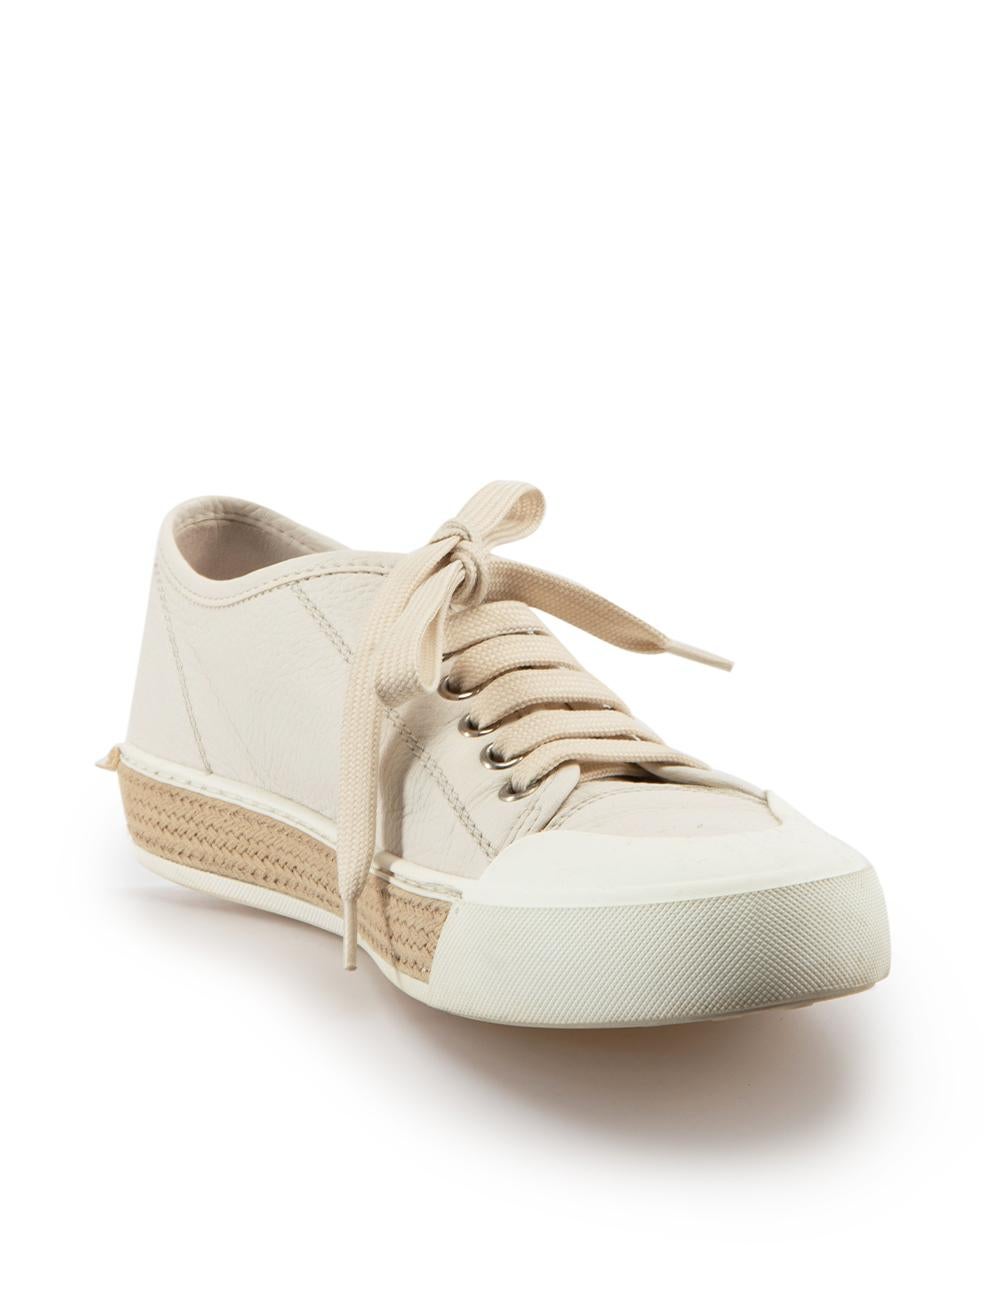 CONDITION is Very good. Minimal wear to shoes is evident. Minimal wear to the rubber soles of both with light marks, particularly at the heels on this used Tod's designer resale item.
 
Details
Ecru
Leather
Low top trainers
Round toe
Flat heel
Lace